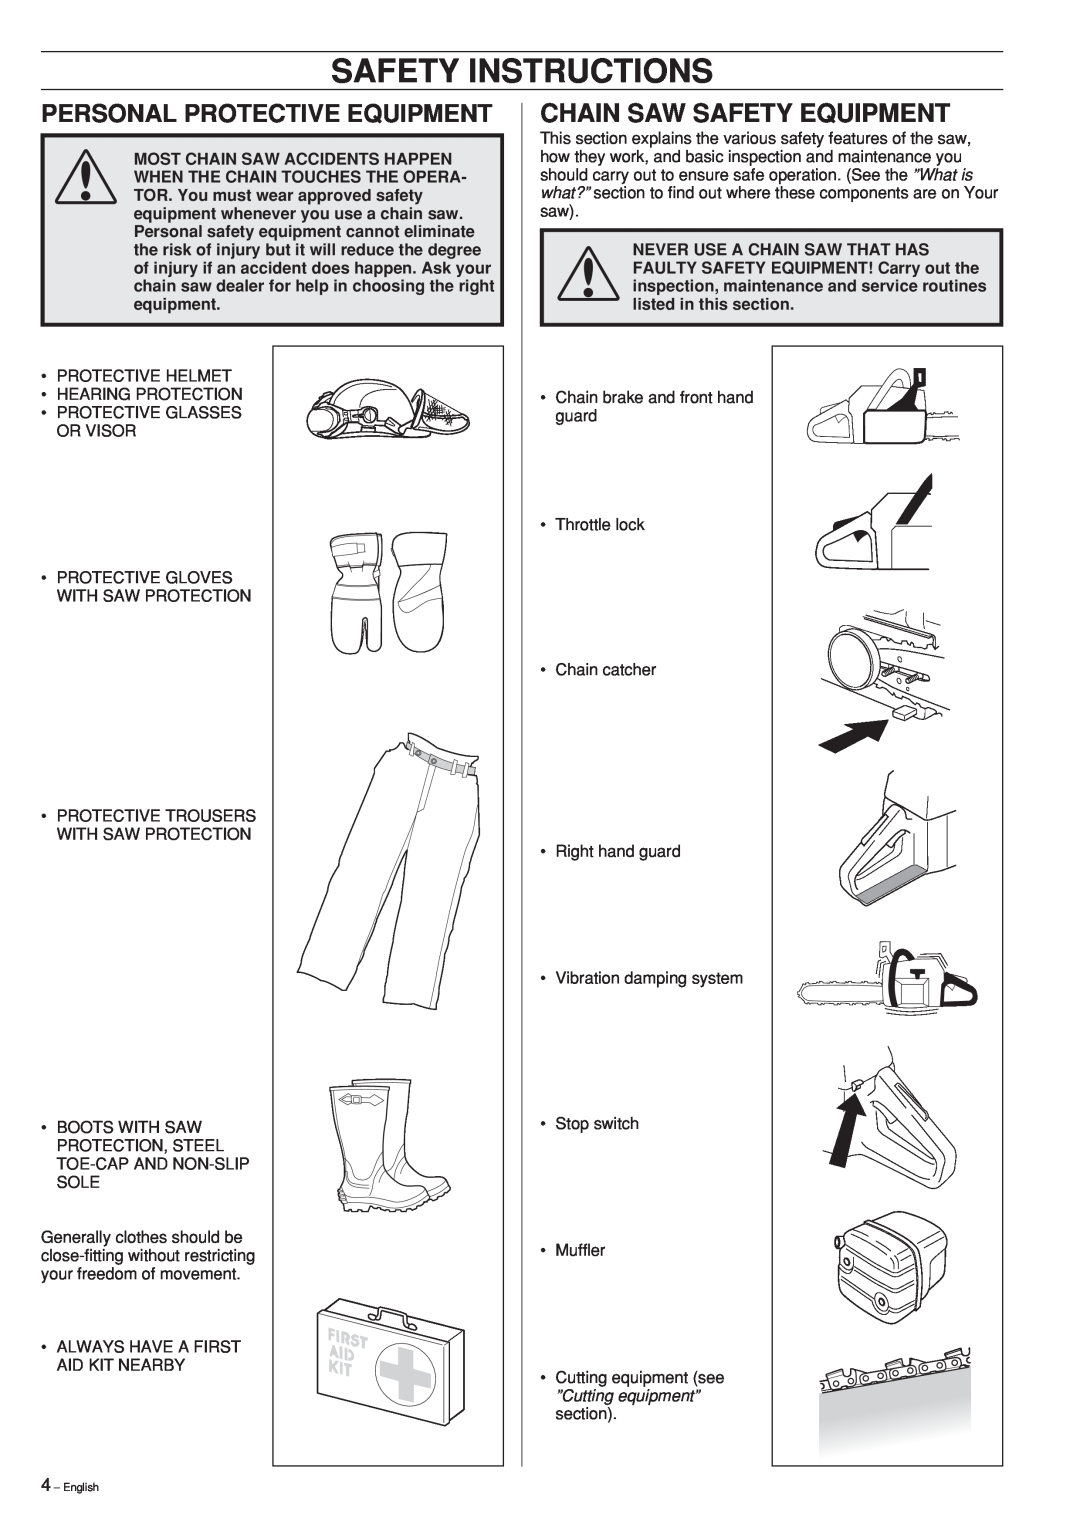 Jonsered 2145, 2141, 2150 manual Safety Instructions, Chain Saw Safety Equipment, Personal Protective Equipment 